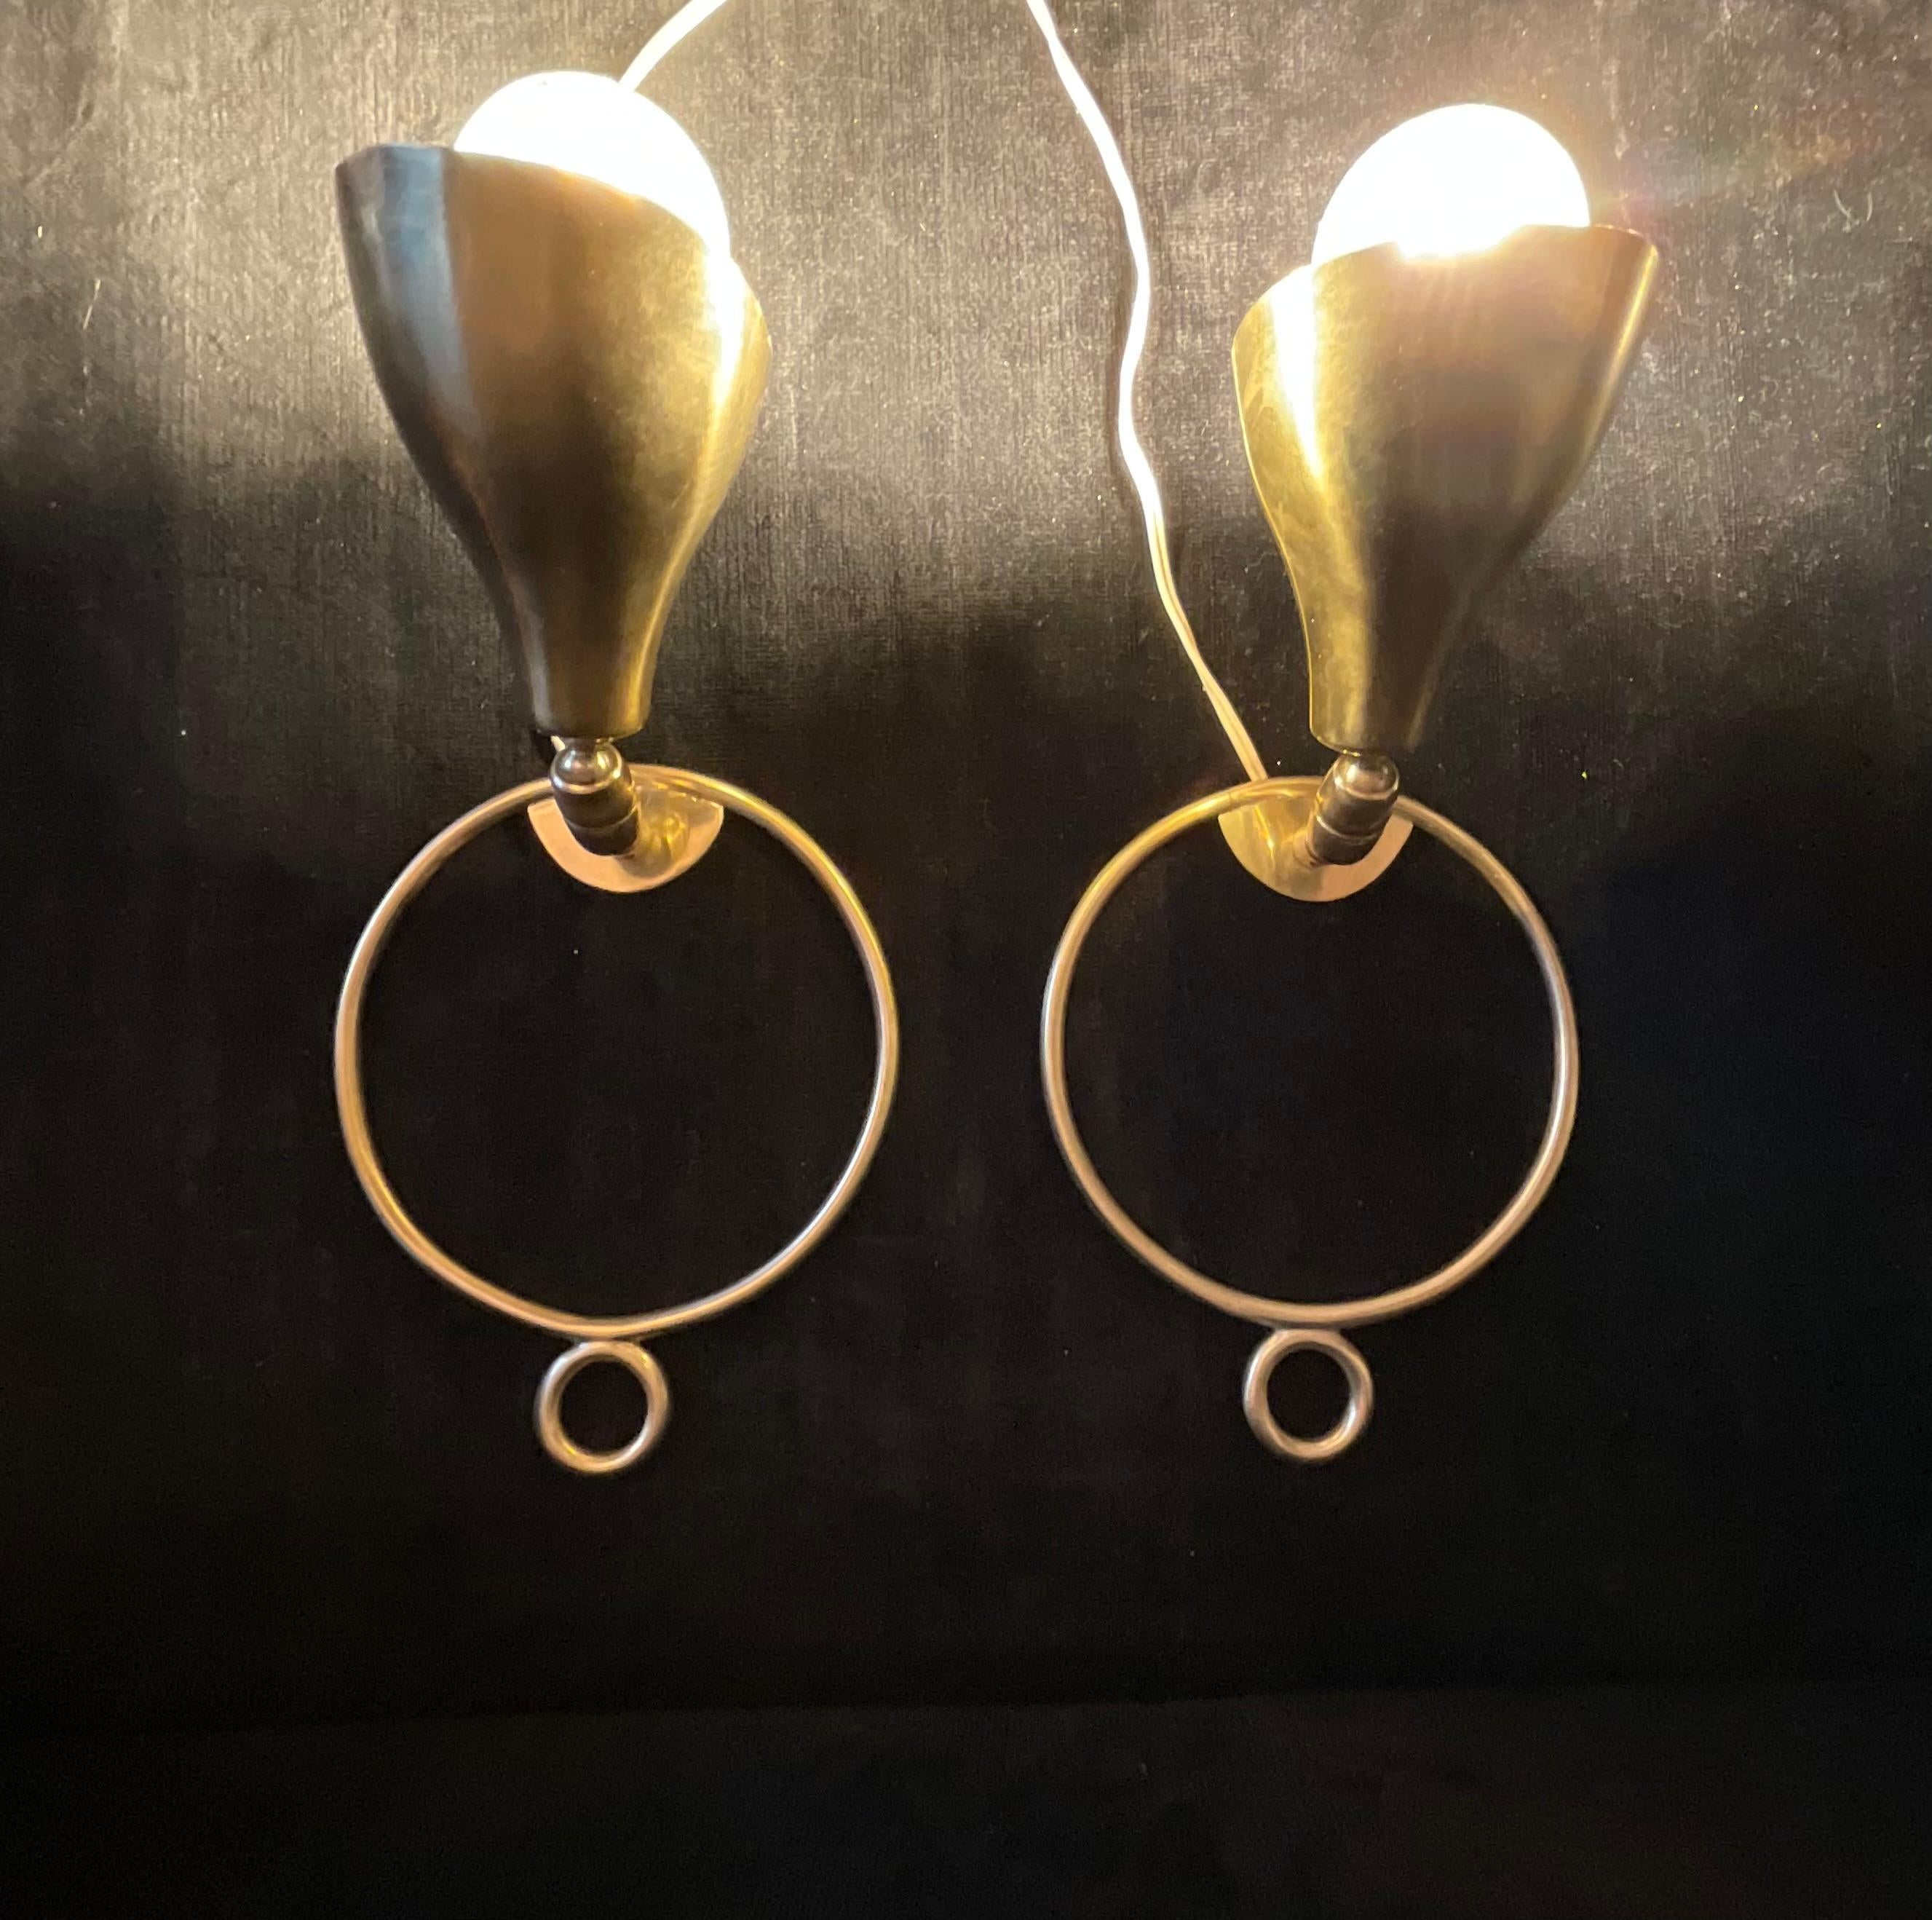 A very rare pair of wall sconces built in brass by the ARTELUCE company and designed by Italian entrepreneur and designer ,GINO SARFATTI in the late 1930s .
The pair of sconces is in perfect condition and in working order.